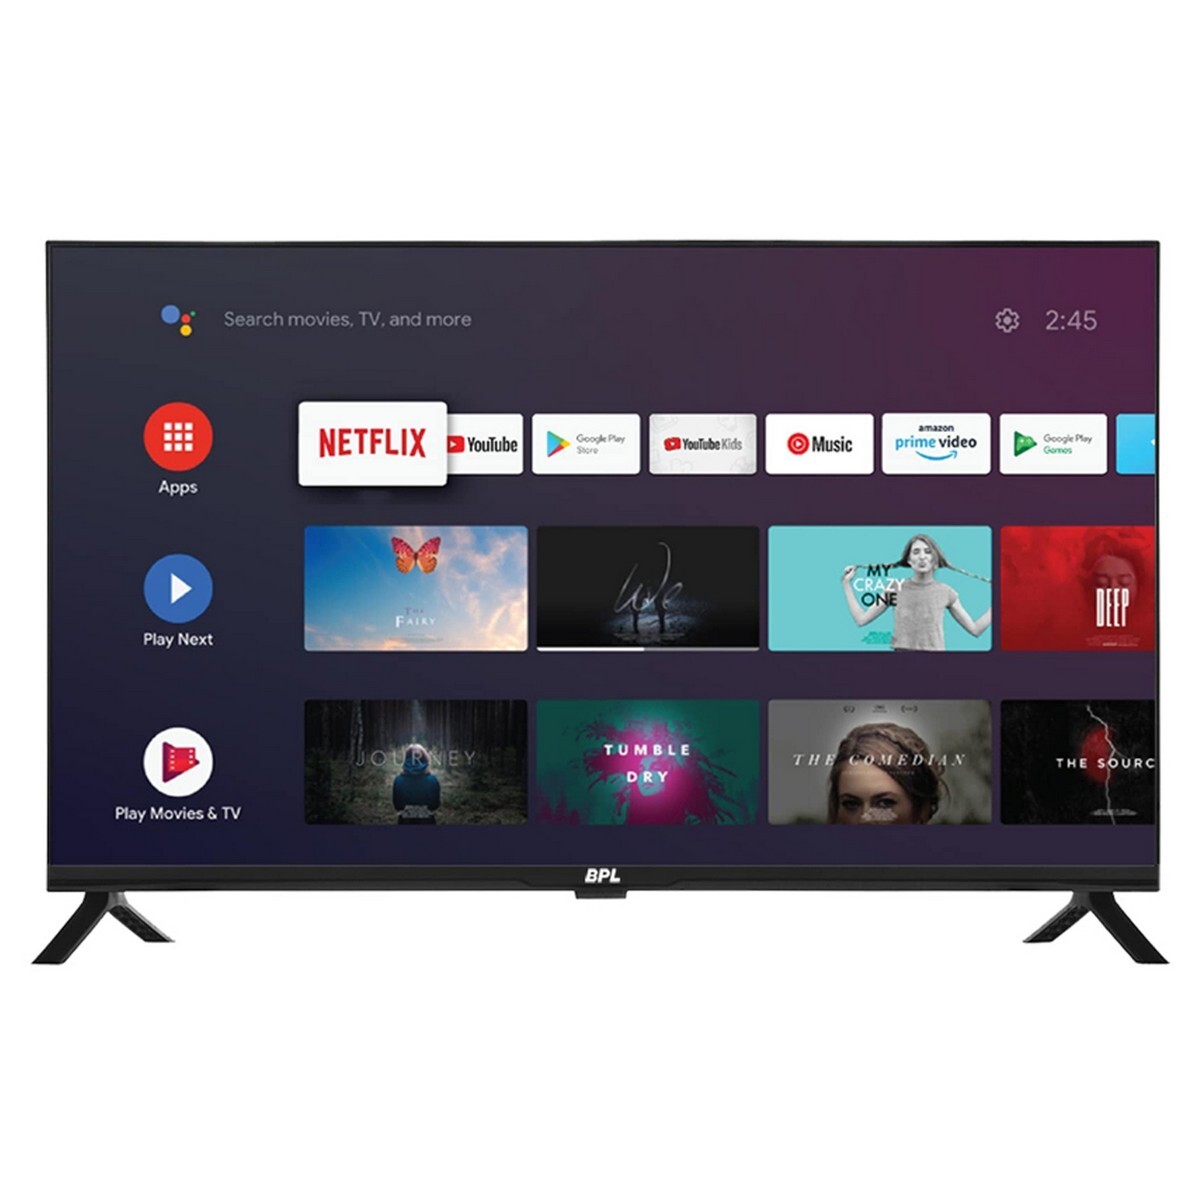 BPL Full HD Android Smart TV 43F-A4301 43"